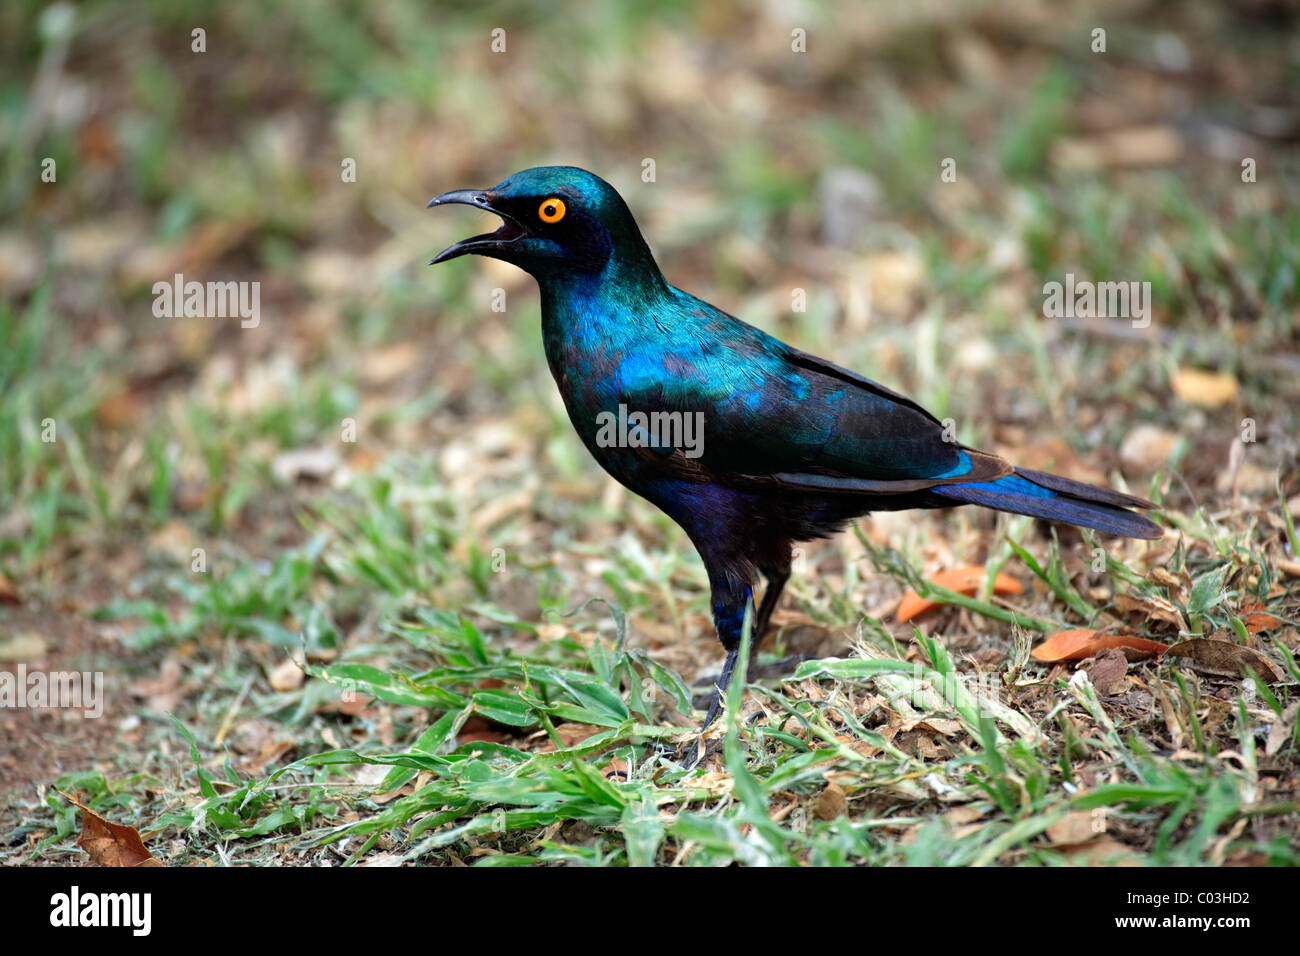 Red-shouldered Glossy-starling (Lamprotornis nitens), adult on the ground, Kruger National Park, South Africa, Africa Stock Photo